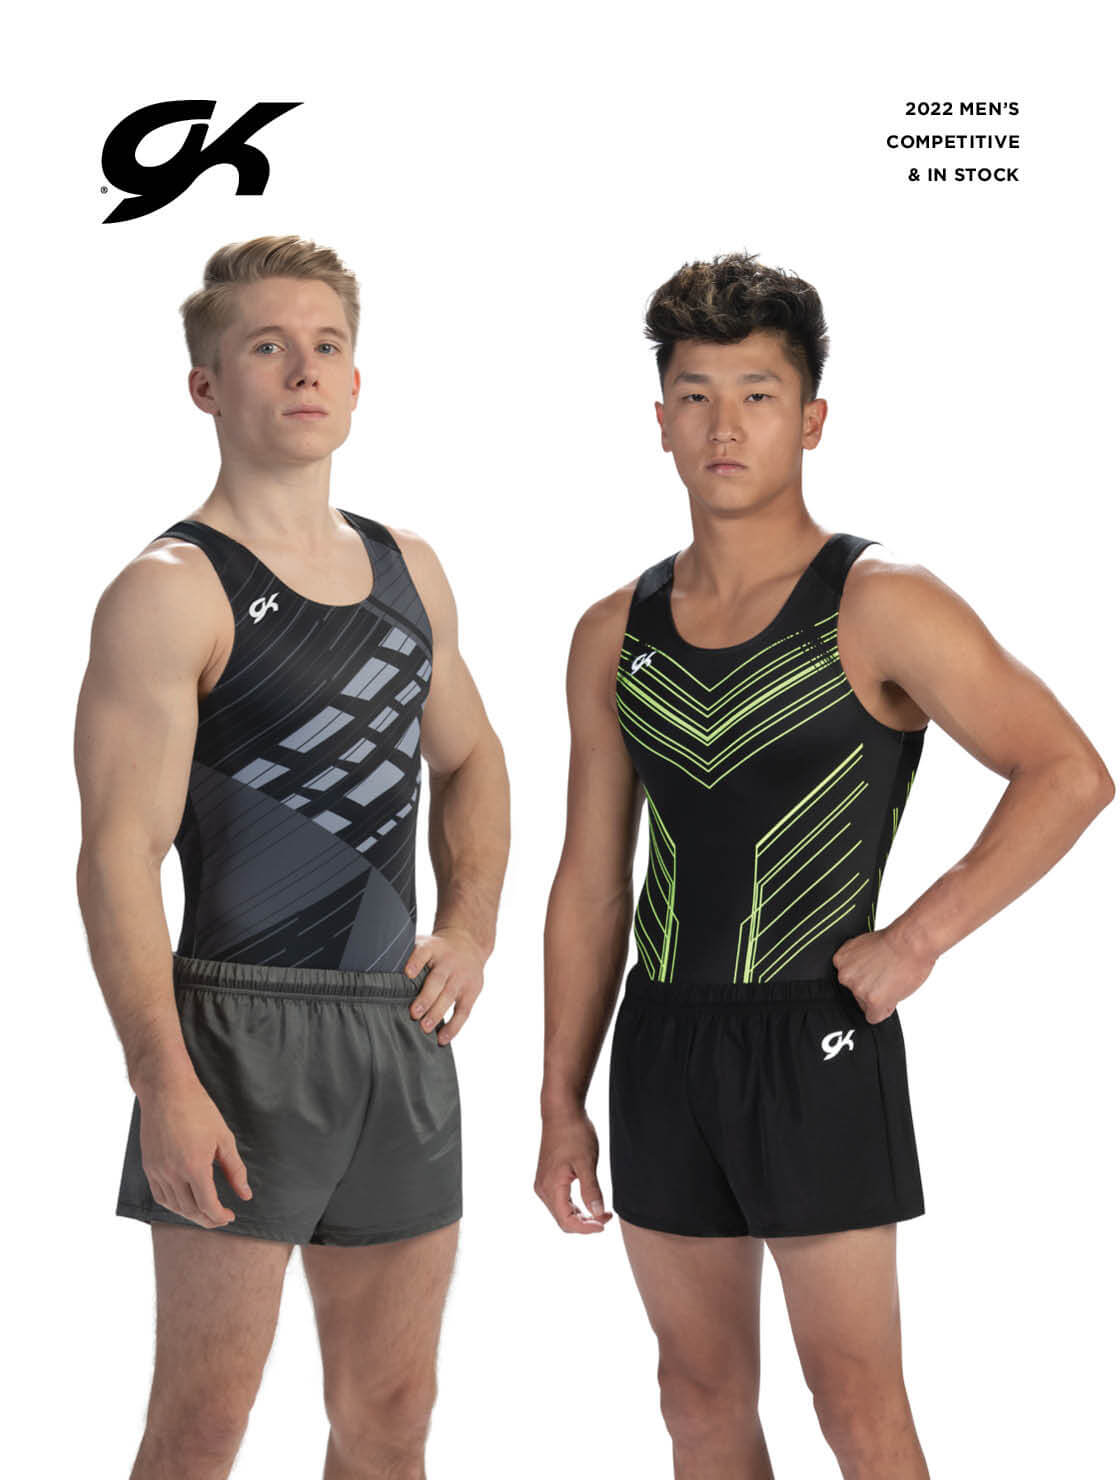 2022-2023 GK Gymnastics Mens Competitive and In Stock Catalog